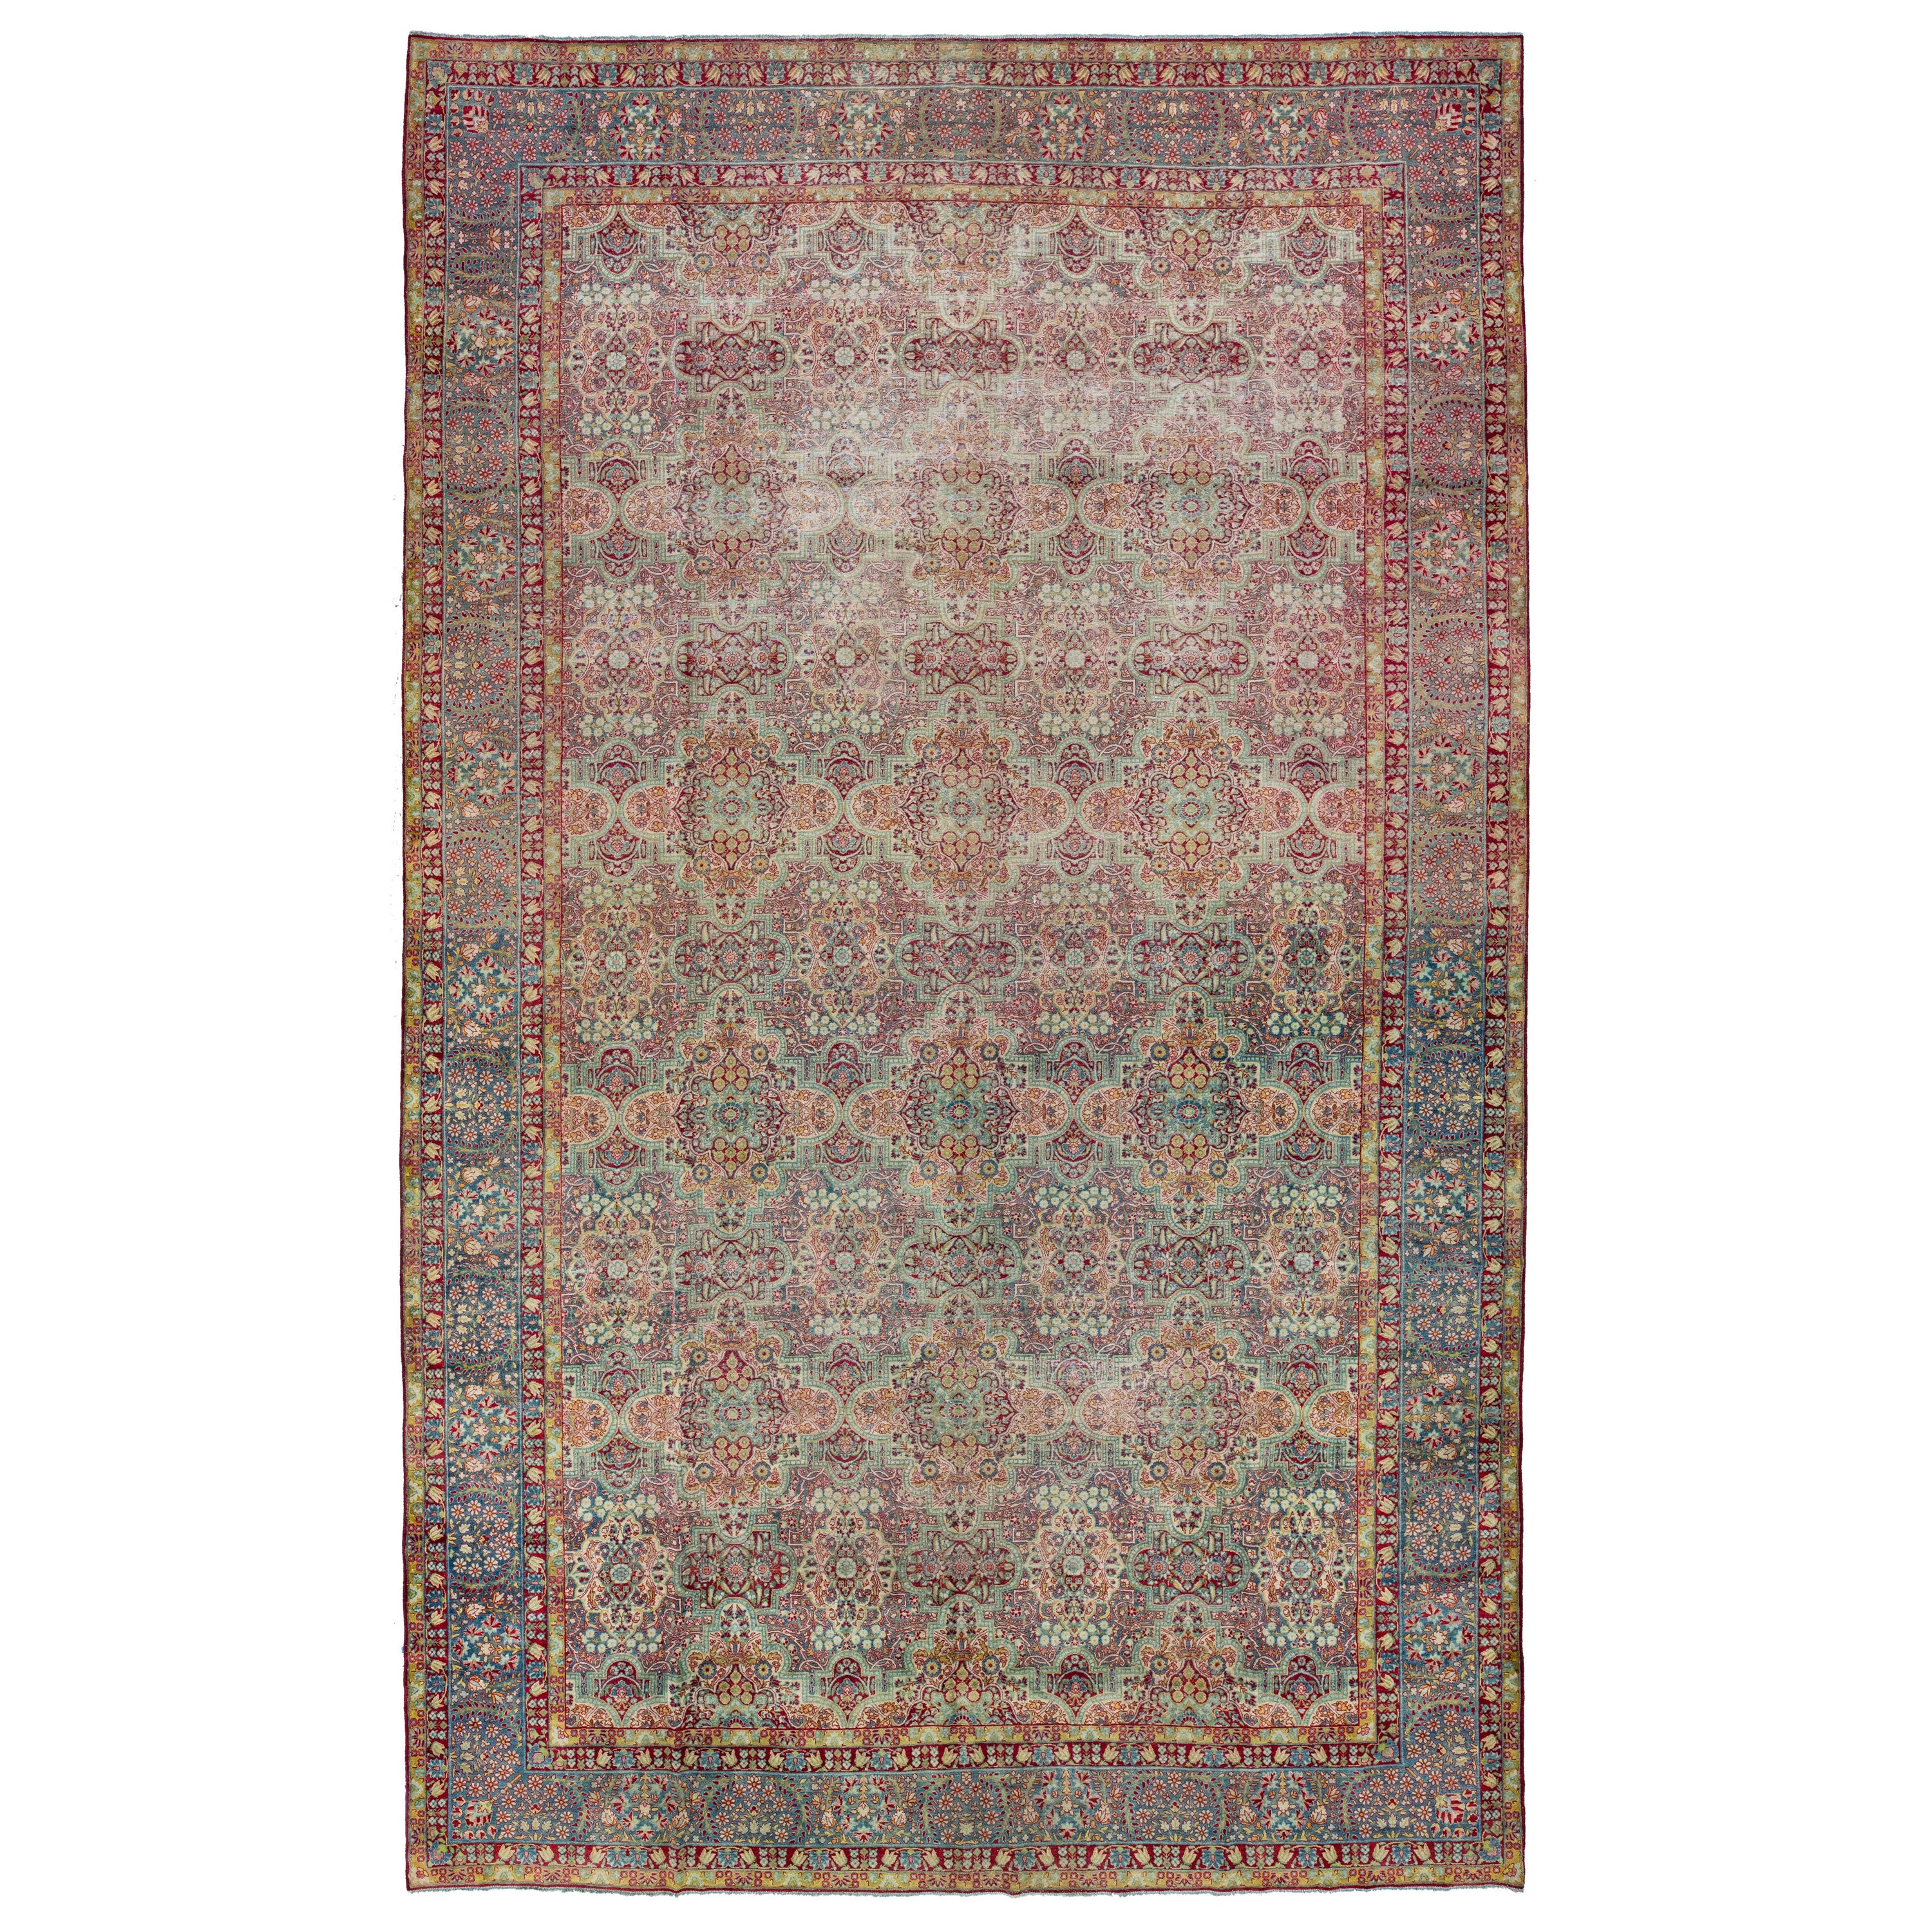 Blue Persian Tabriz Antique Wool Rug with Allover Floral Motif from the 1900's